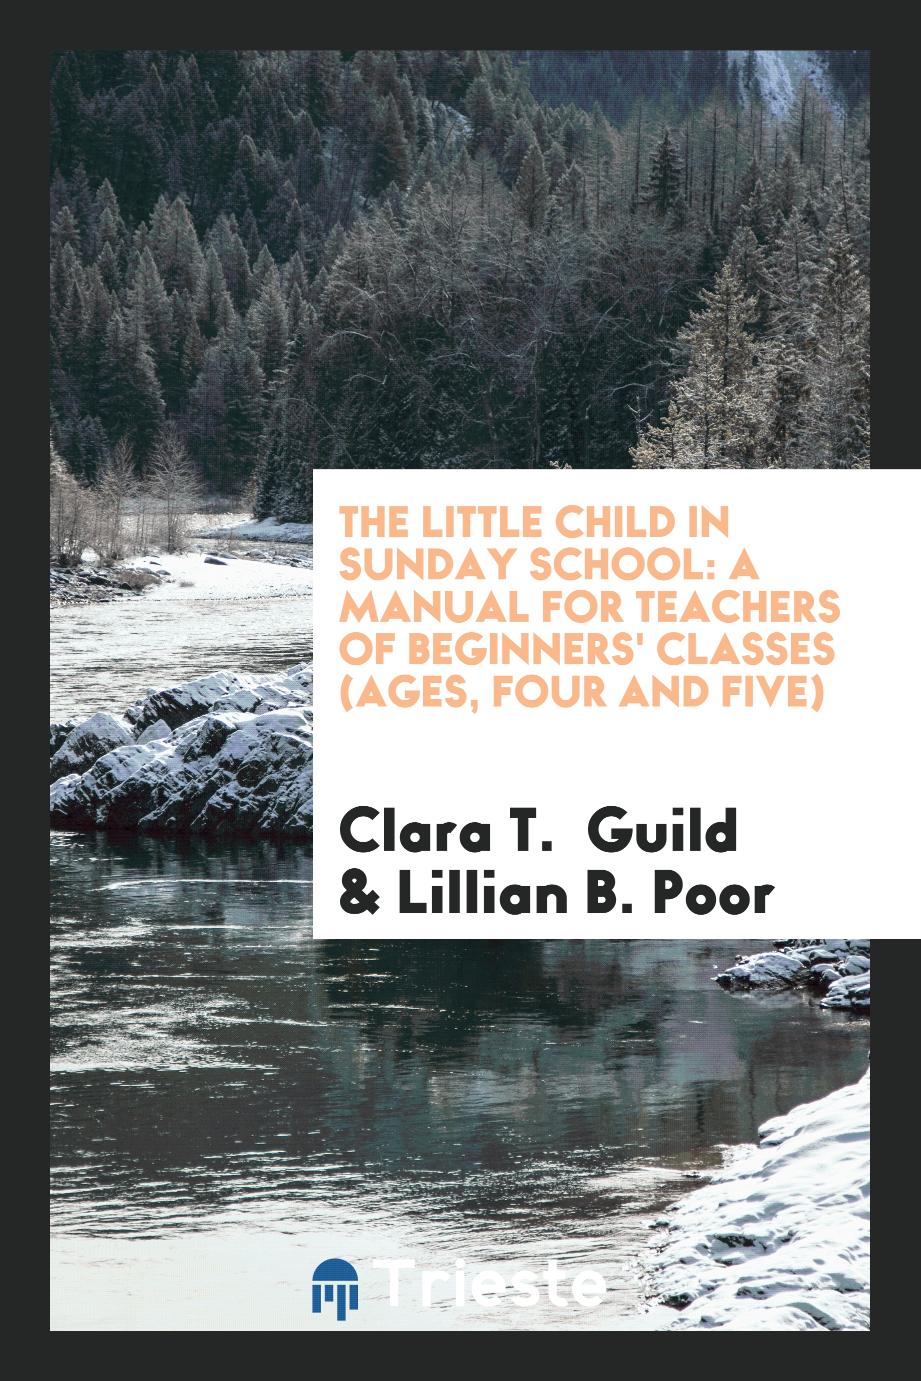 The Little Child in Sunday School: A Manual for Teachers of Beginners' Classes (Ages, Four and Five)